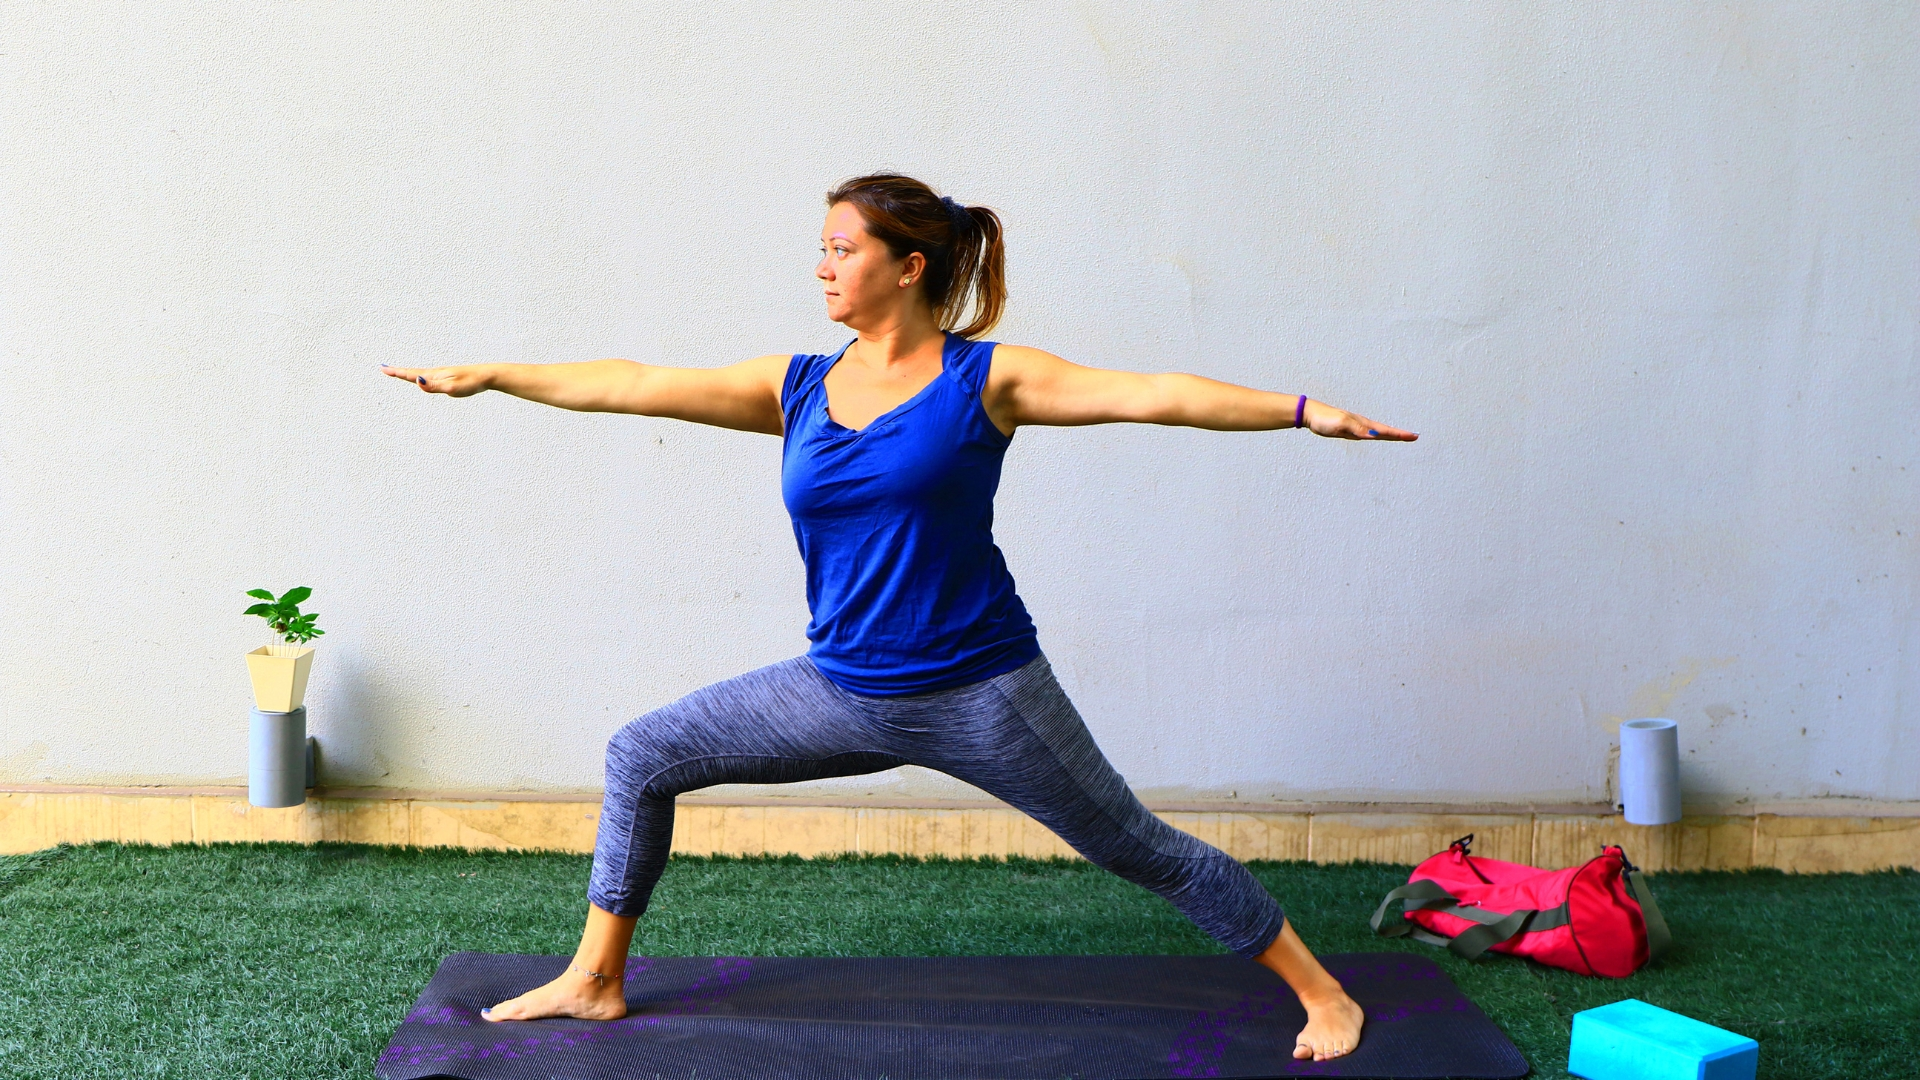 How to Build Muscle with Asanas? - Warrior II Pose